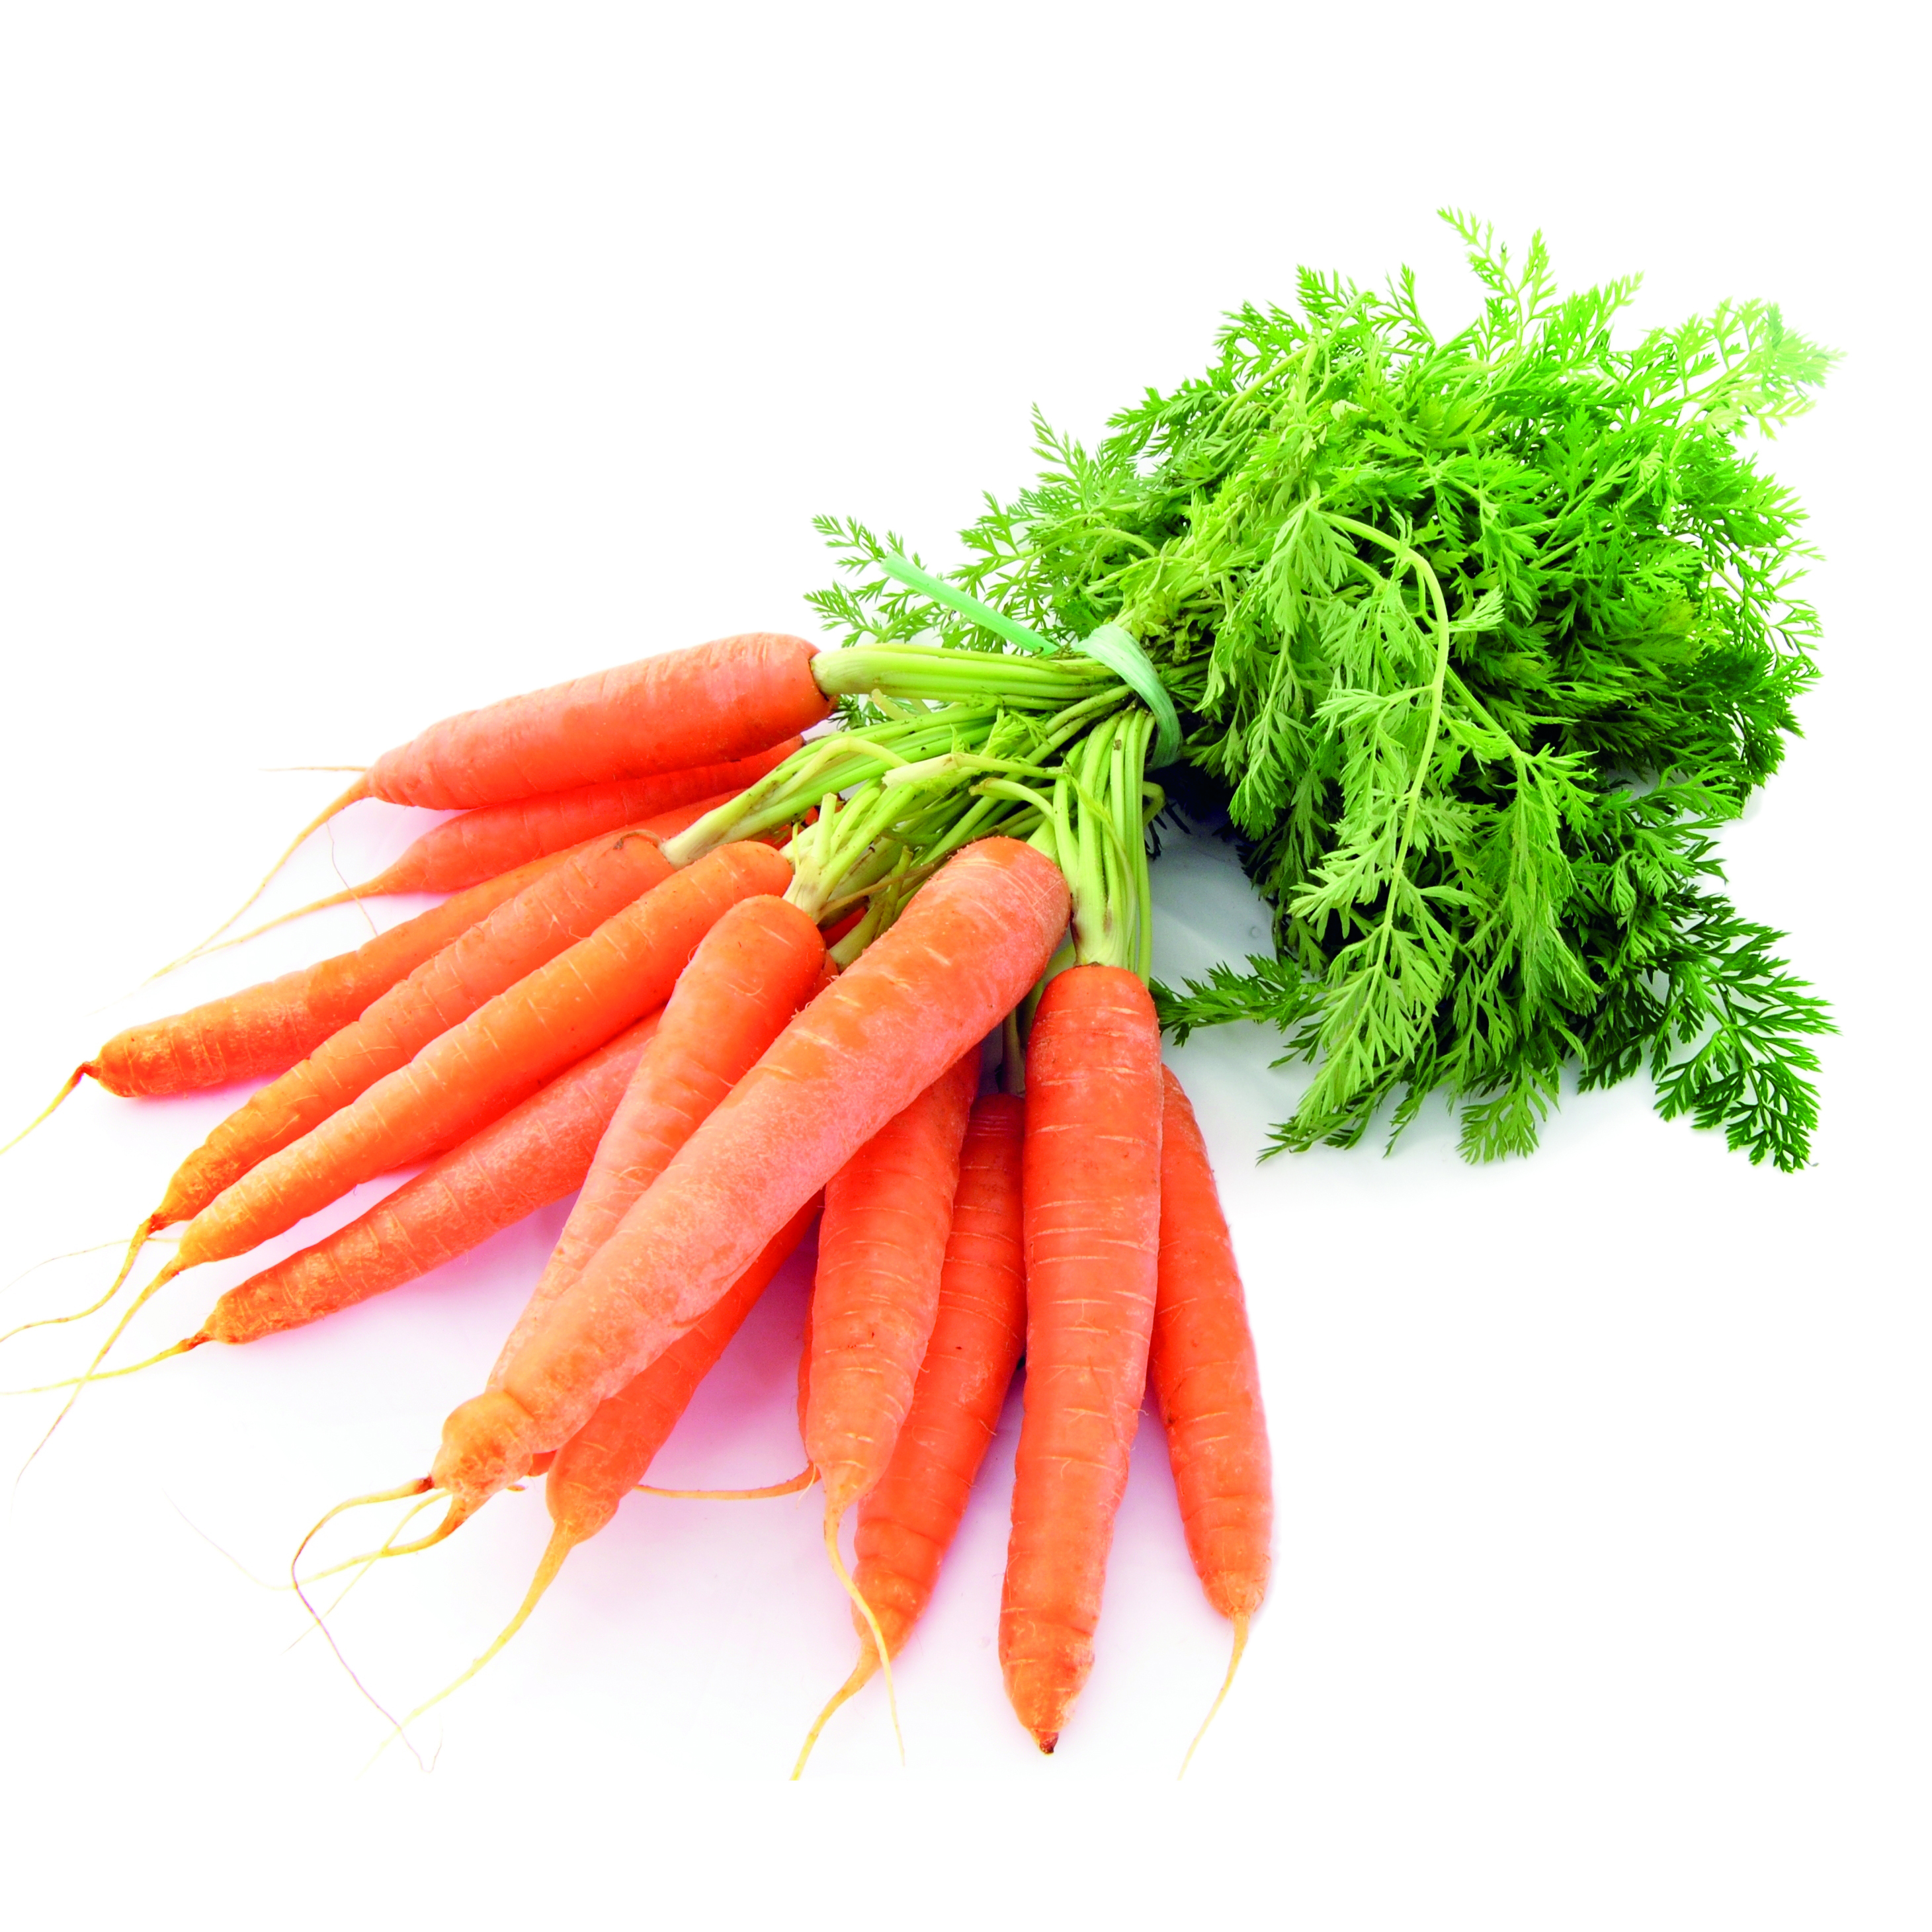 Image of carrots.